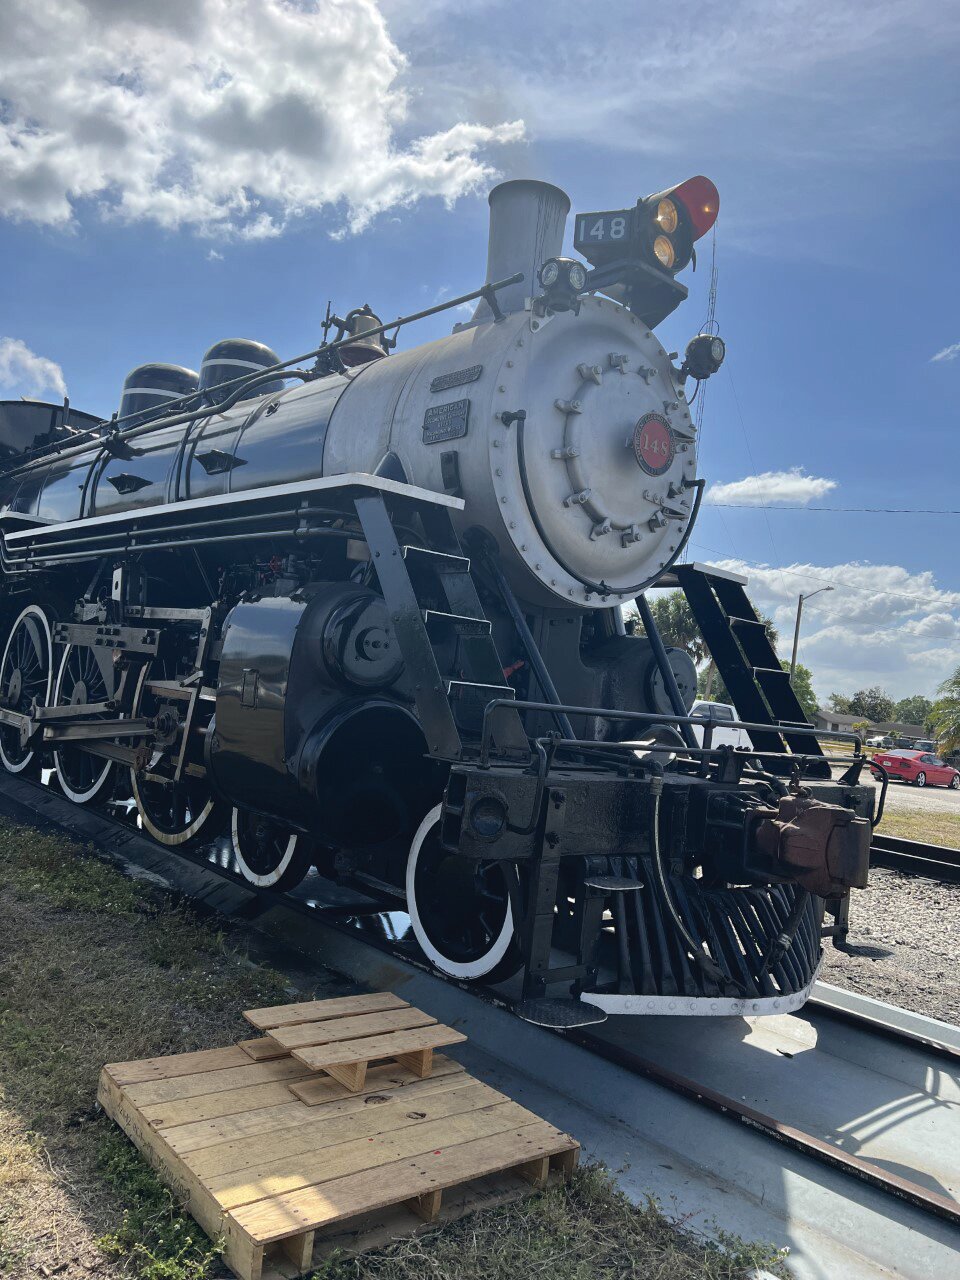 Trains will depart Lake Placid on Friday, July 28 and Saturday, July 29 at 10 a.m., noon, and 2 p.m. each day. Tickets are $25.